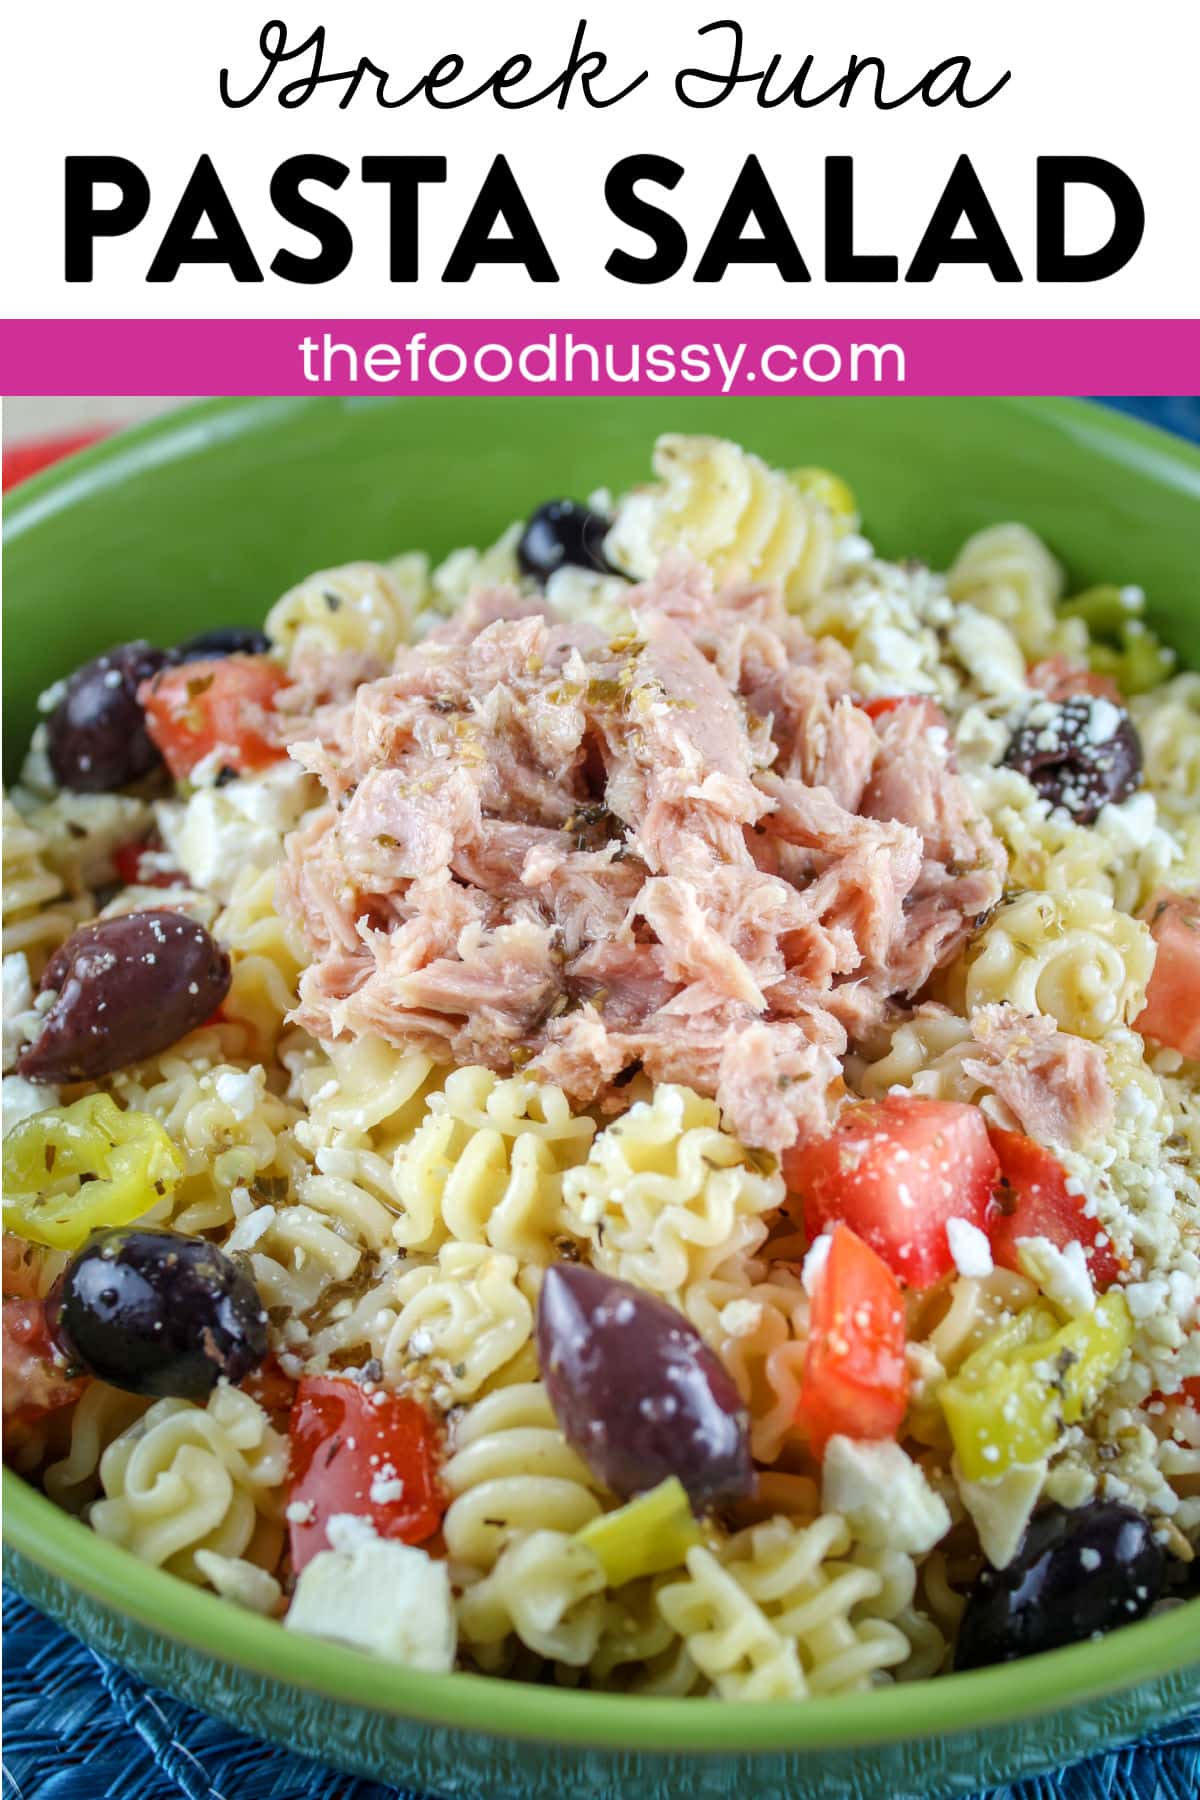 This Greek Tuna Pasta Salad without mayo is a favorite in my house! Loaded with Mediterranean ingredients like kalamata olives and feta then topped with flavorful flaky tuna - it's healthy and delicious!  via @foodhussy